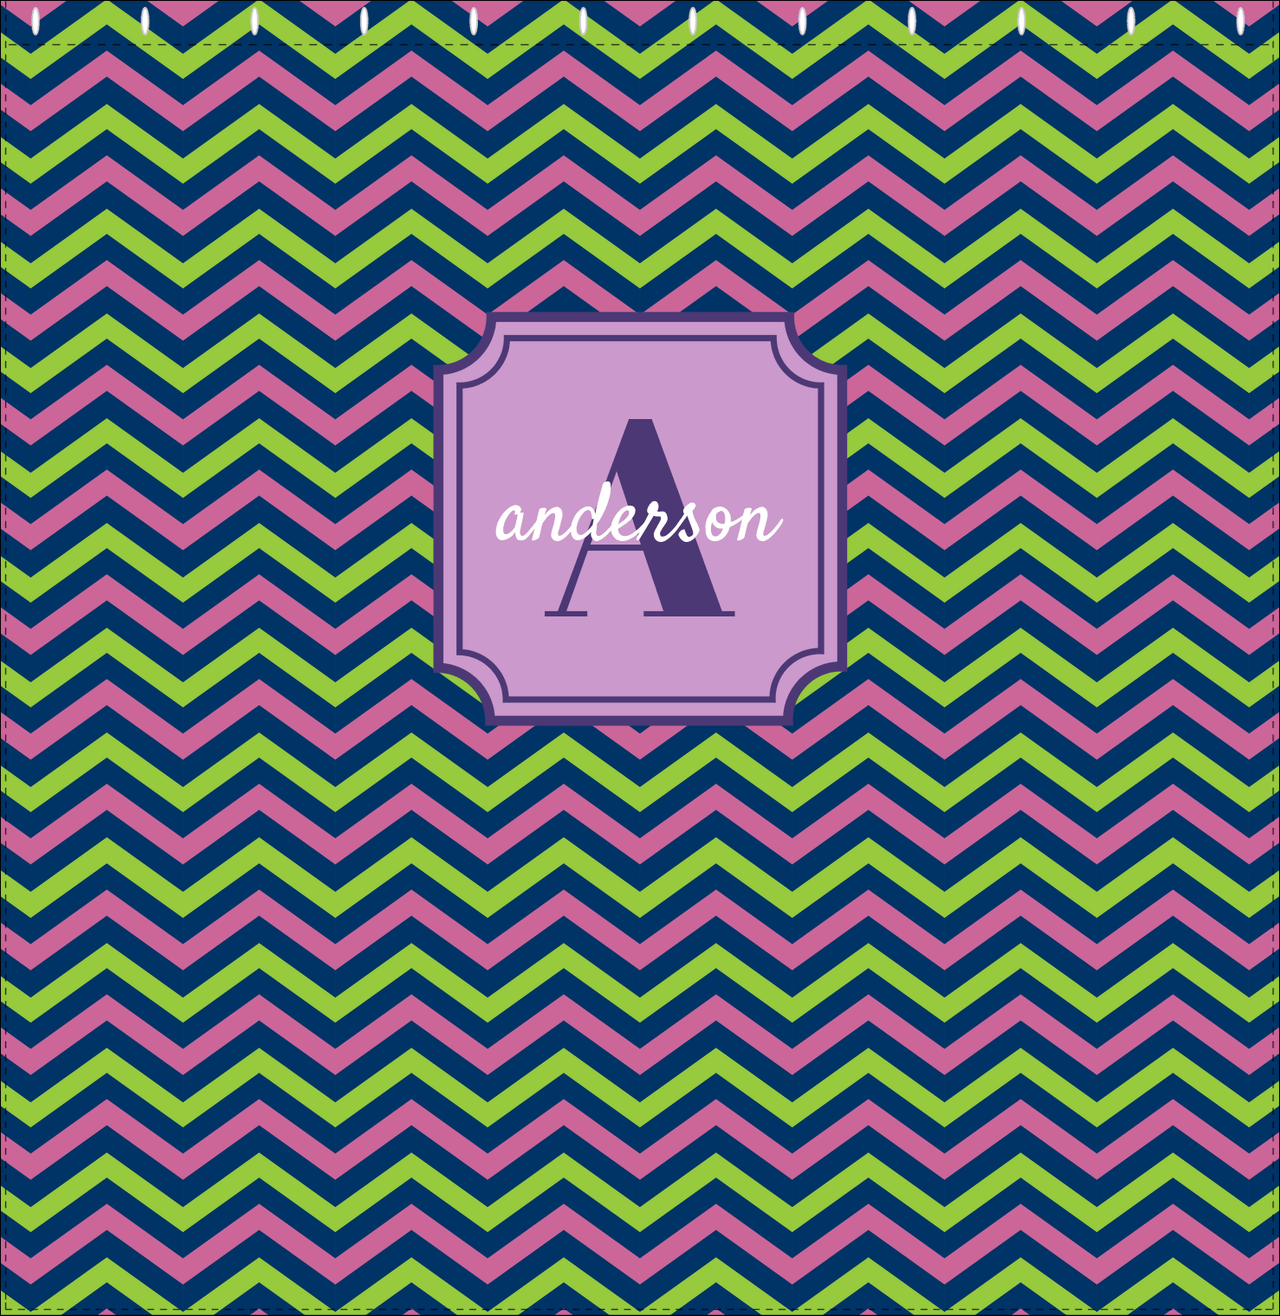 Personalized Chevron Shower Curtain - Purple and Lime - Stamp Nameplate - Decorate View